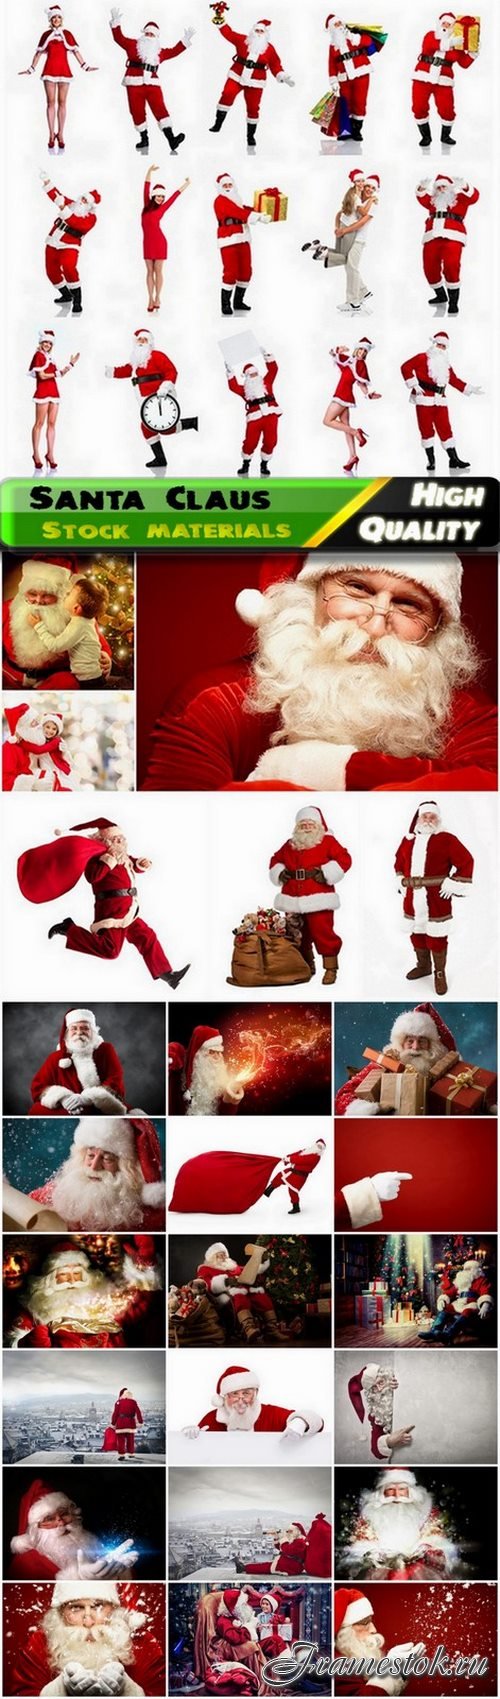 Santa Claus in a red dress with a bag of gifts - 25 HQ Jpg